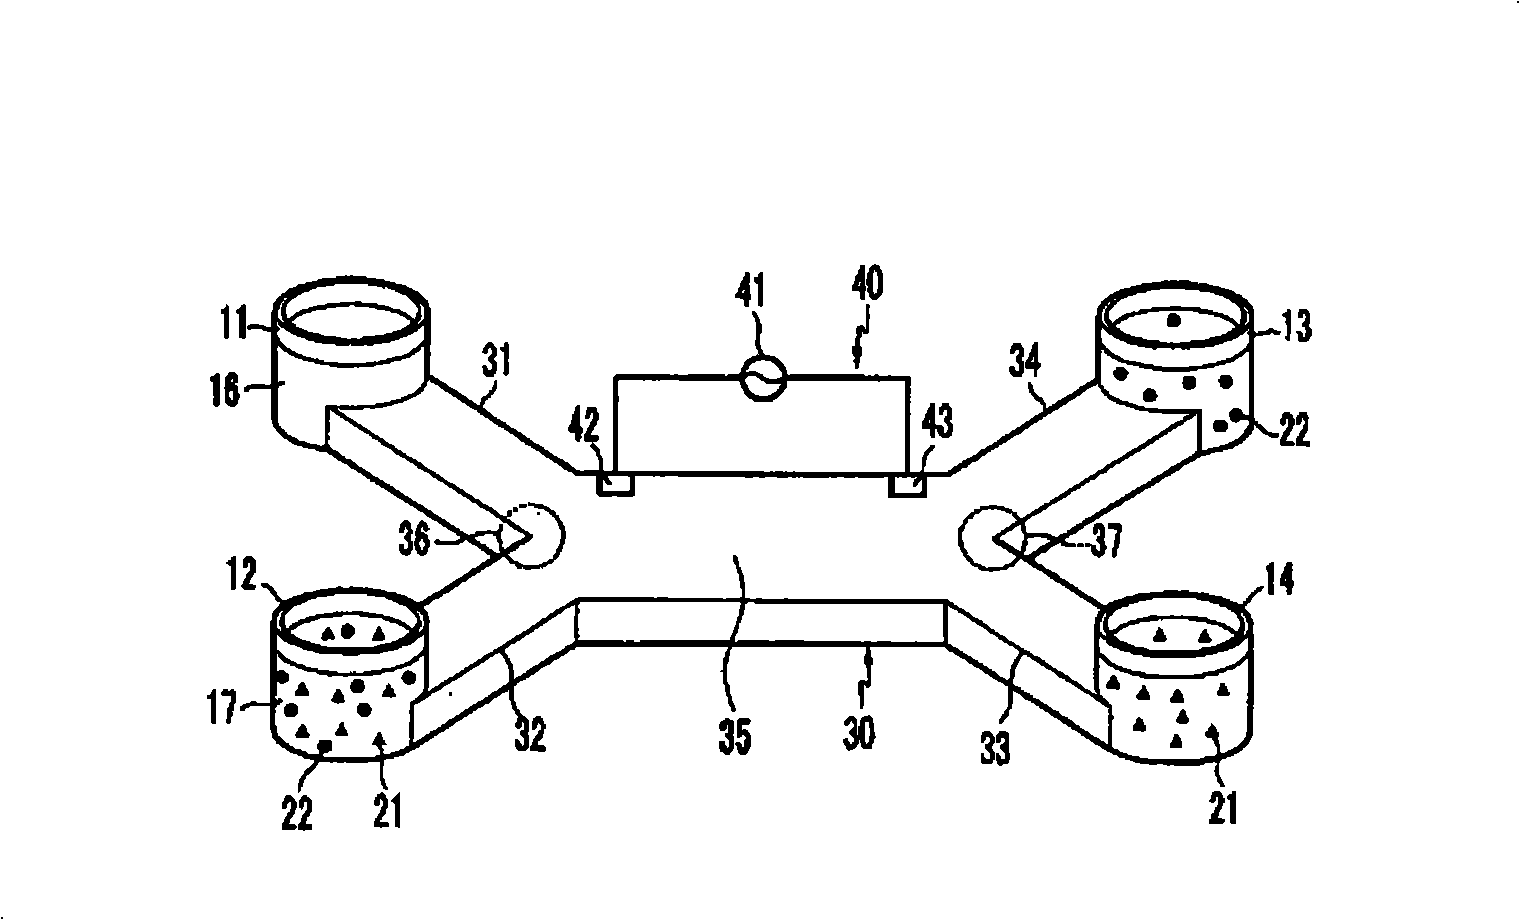 Apparatus and method for separating particles